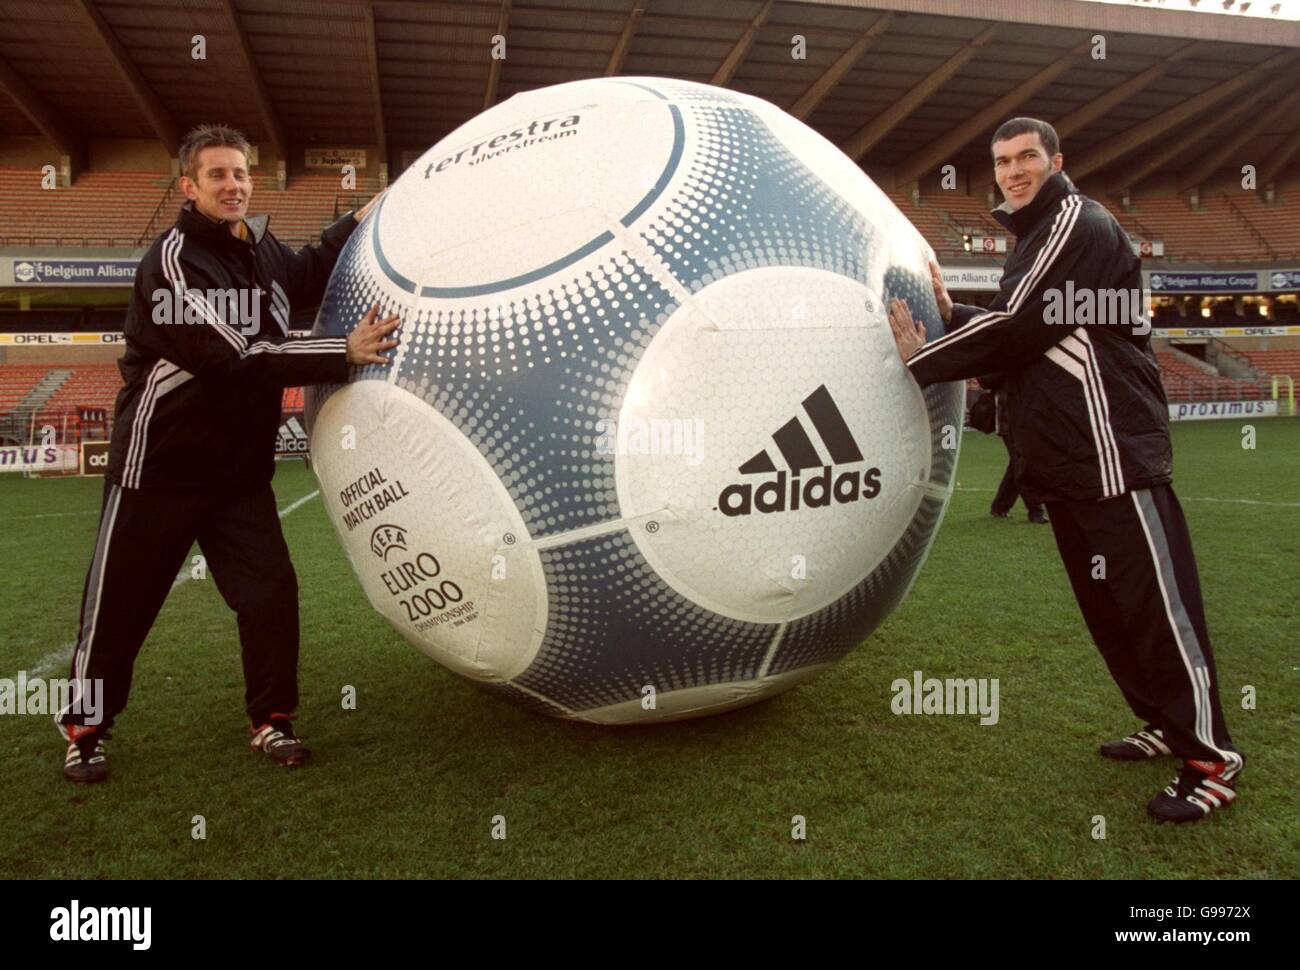 Edwin Van Der Sar and Zinedine Zidane launch the new Adidas Terrestra  Silverstream football which will be used as the official ball for the Euro  2000 tournament at RSC Anderlecht, Brussels, Belgium